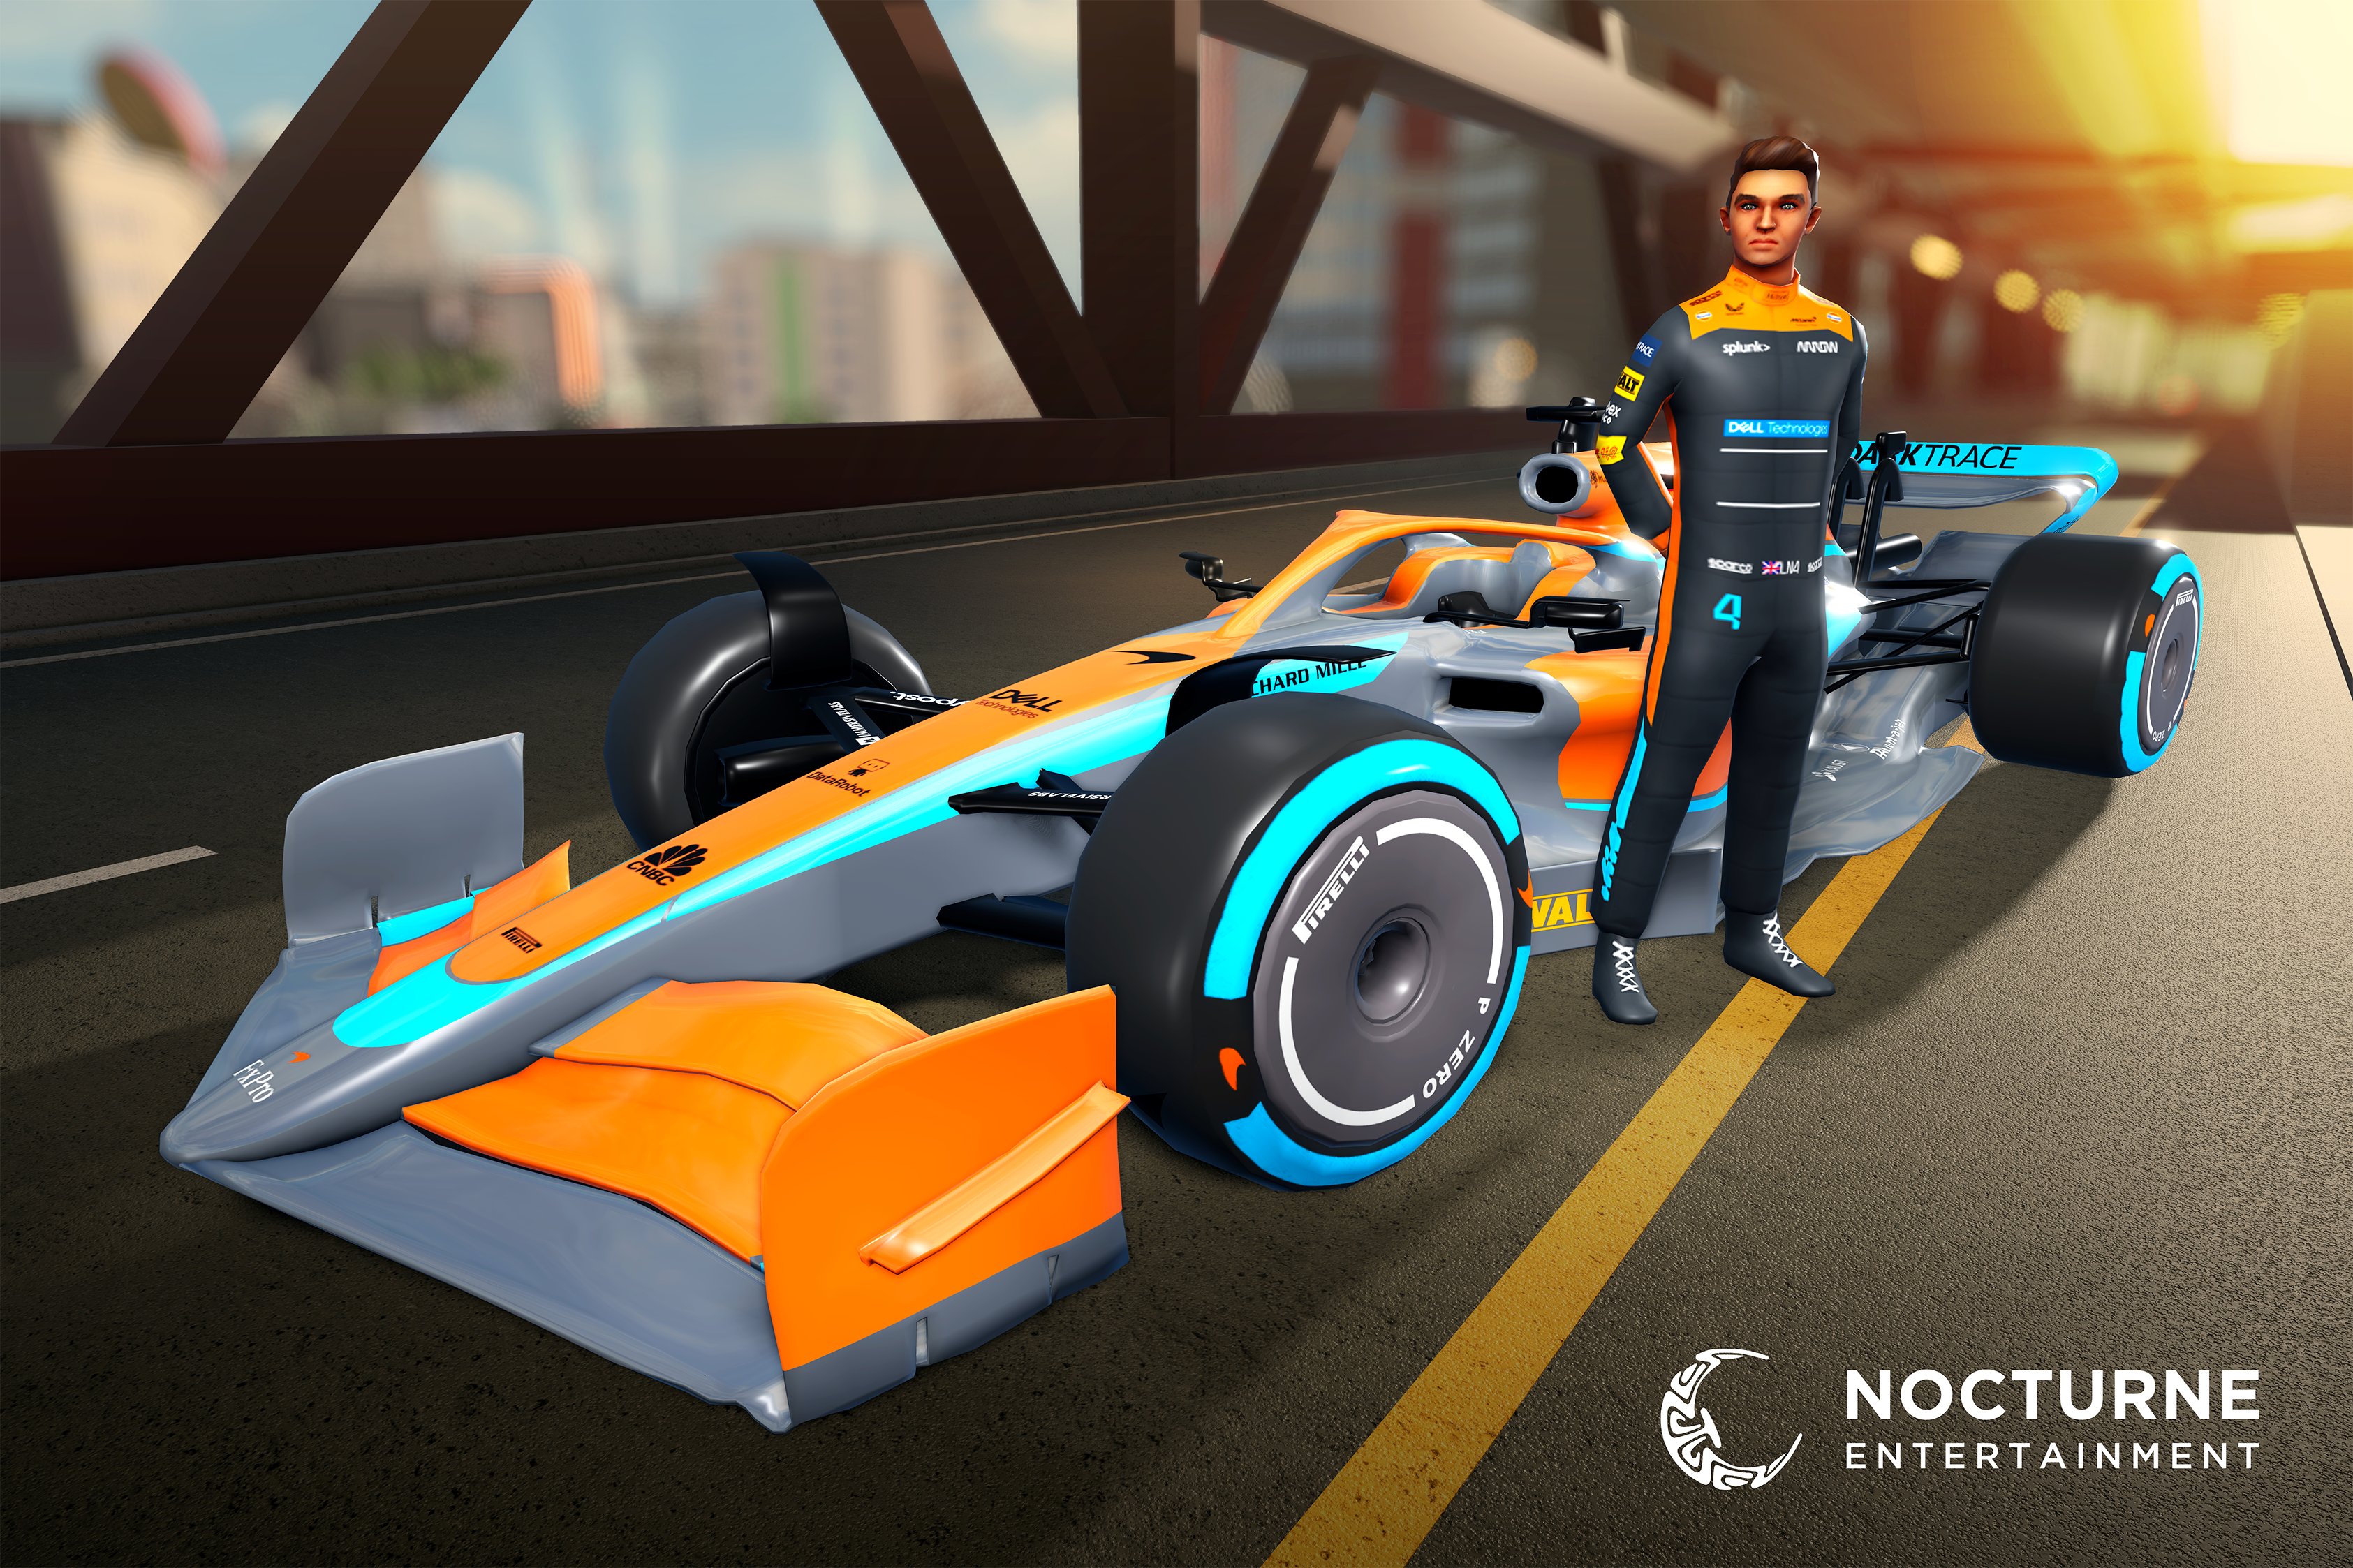 Nocturne Entertainment on X: Driving Simulator is now FREE TO PLAY!  🥳 A huge thanks to our community for helping us out  by providing valuable feedback. With your continued support, we hope